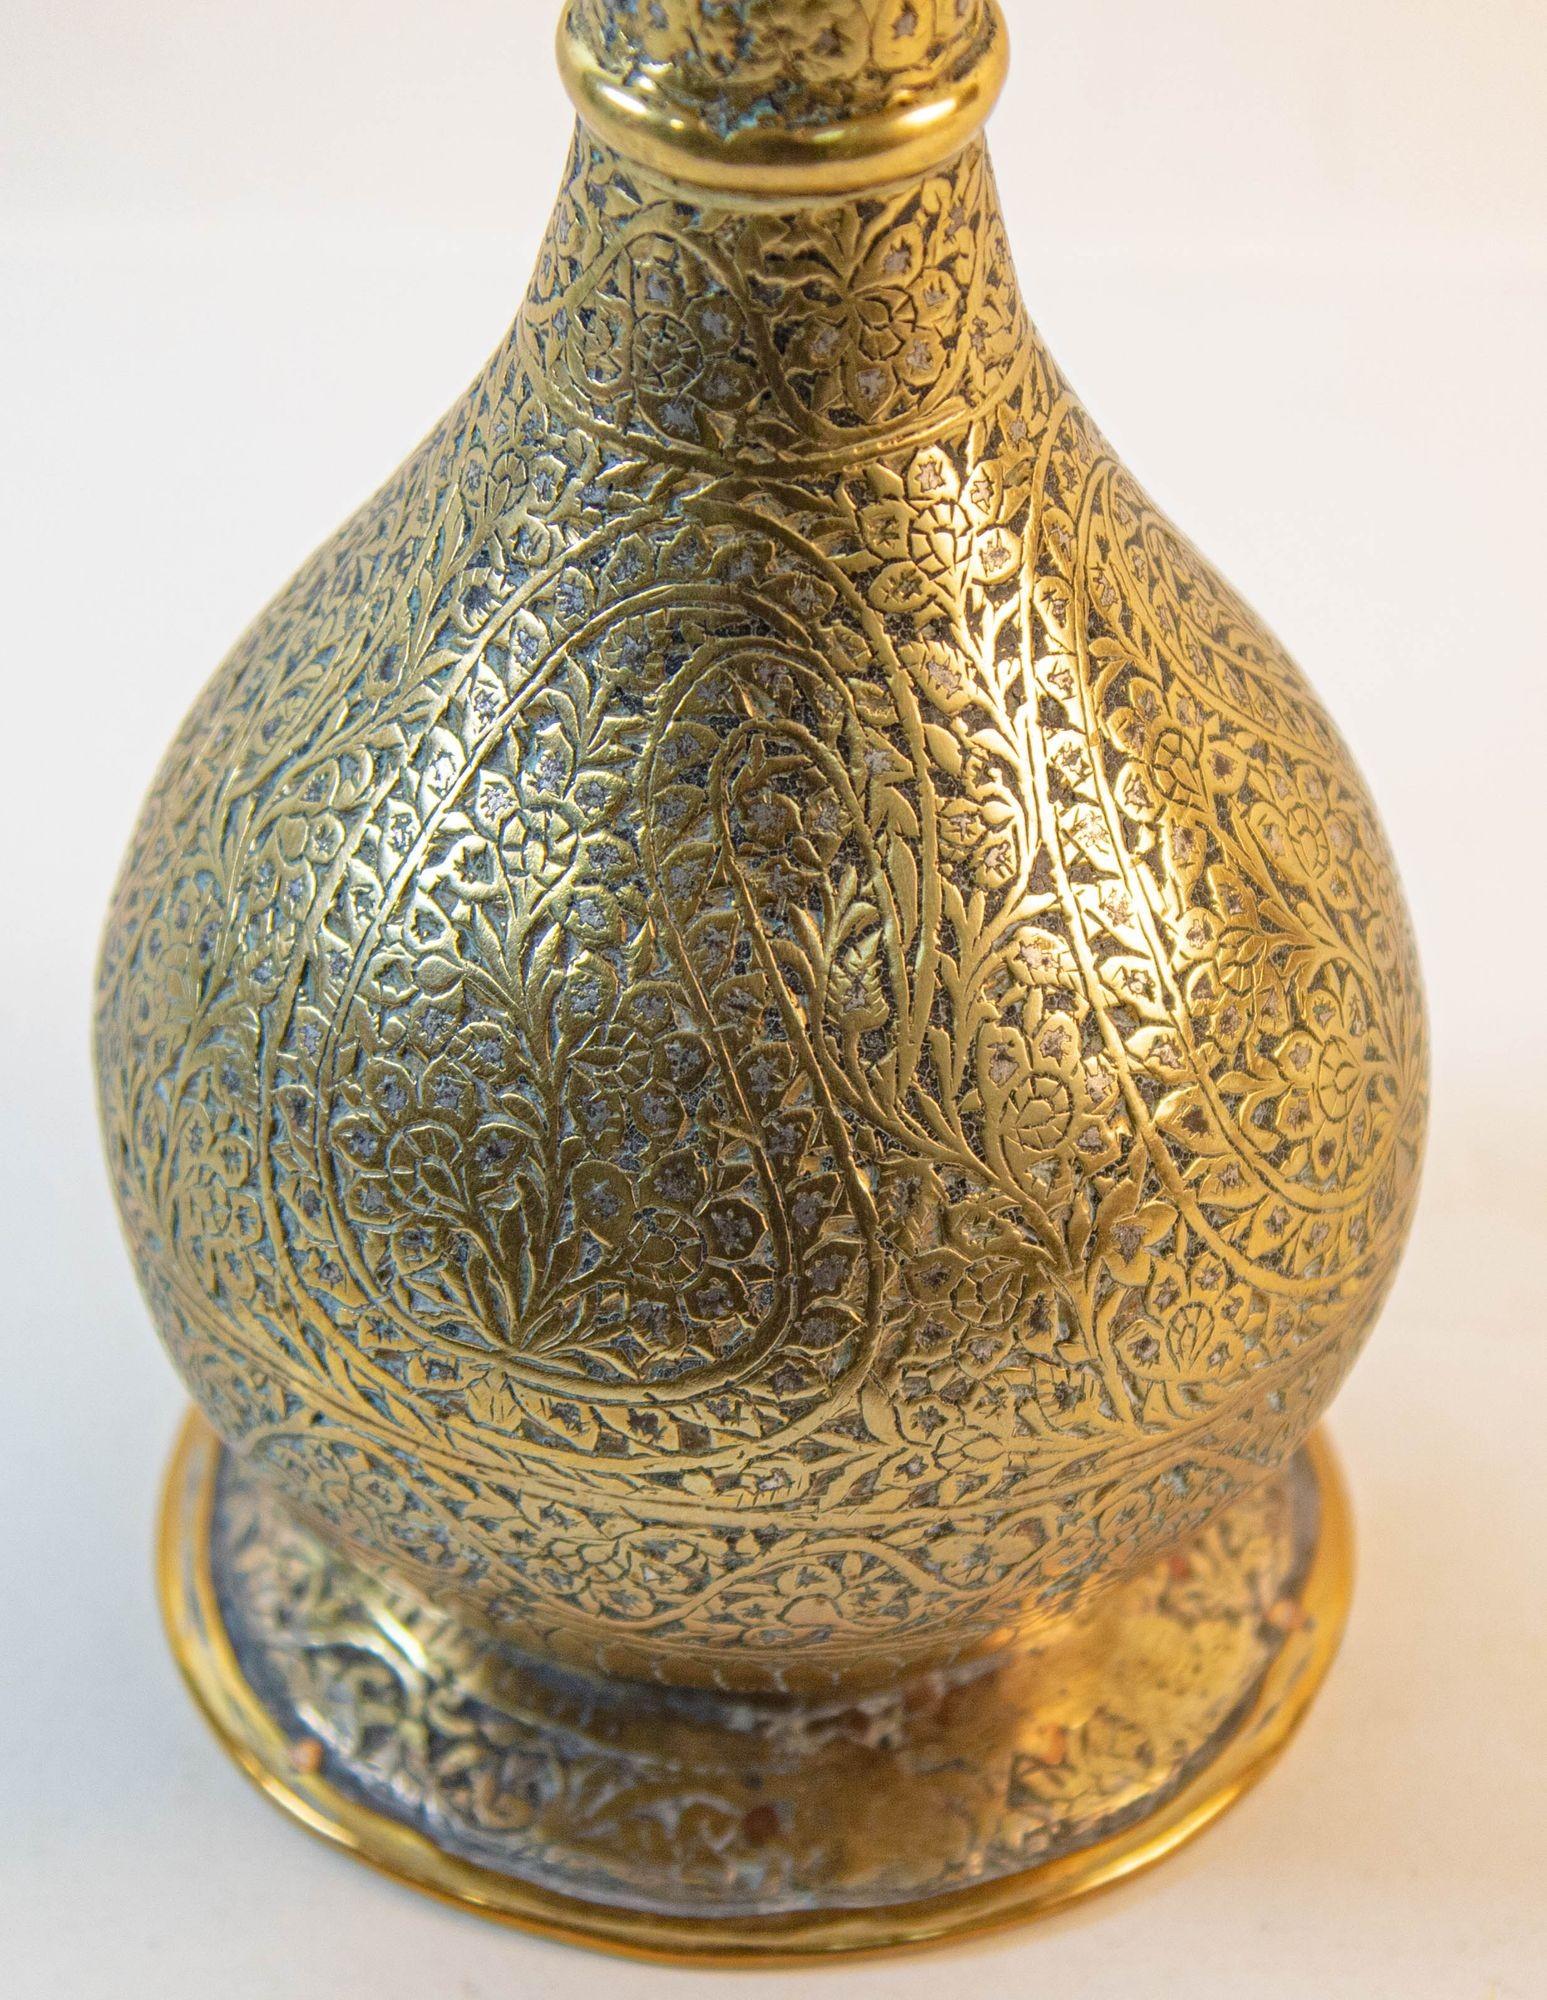 A fine antique 19th century Mughal Nargile or hookah pipe base made of brass or bronze, the base with engraving and etching decorations.
Mameluke revival brass hookah base, elaborately and elegantly hand decorated, engraved with with a recessed